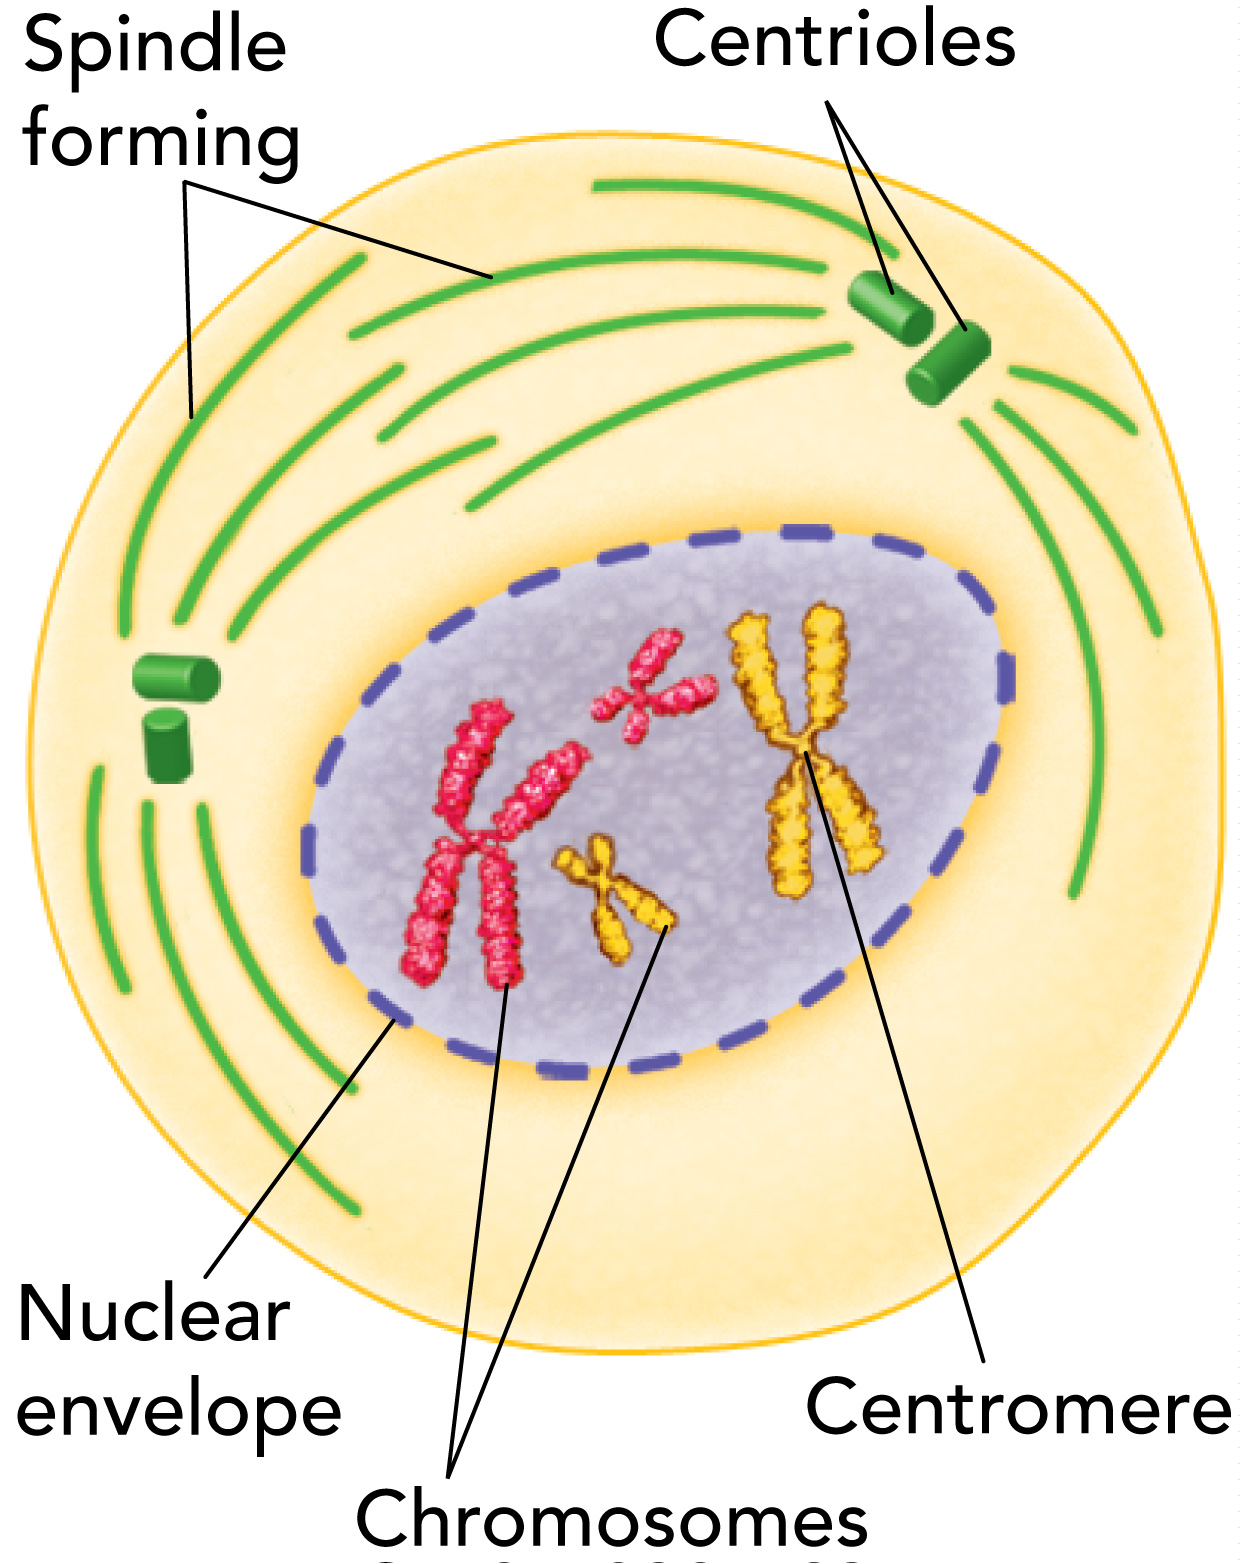 In Prophase, the duplicated chromosomes in the nuclear envelope become visible; the spindles form outside the envelope linking to the centrioles.